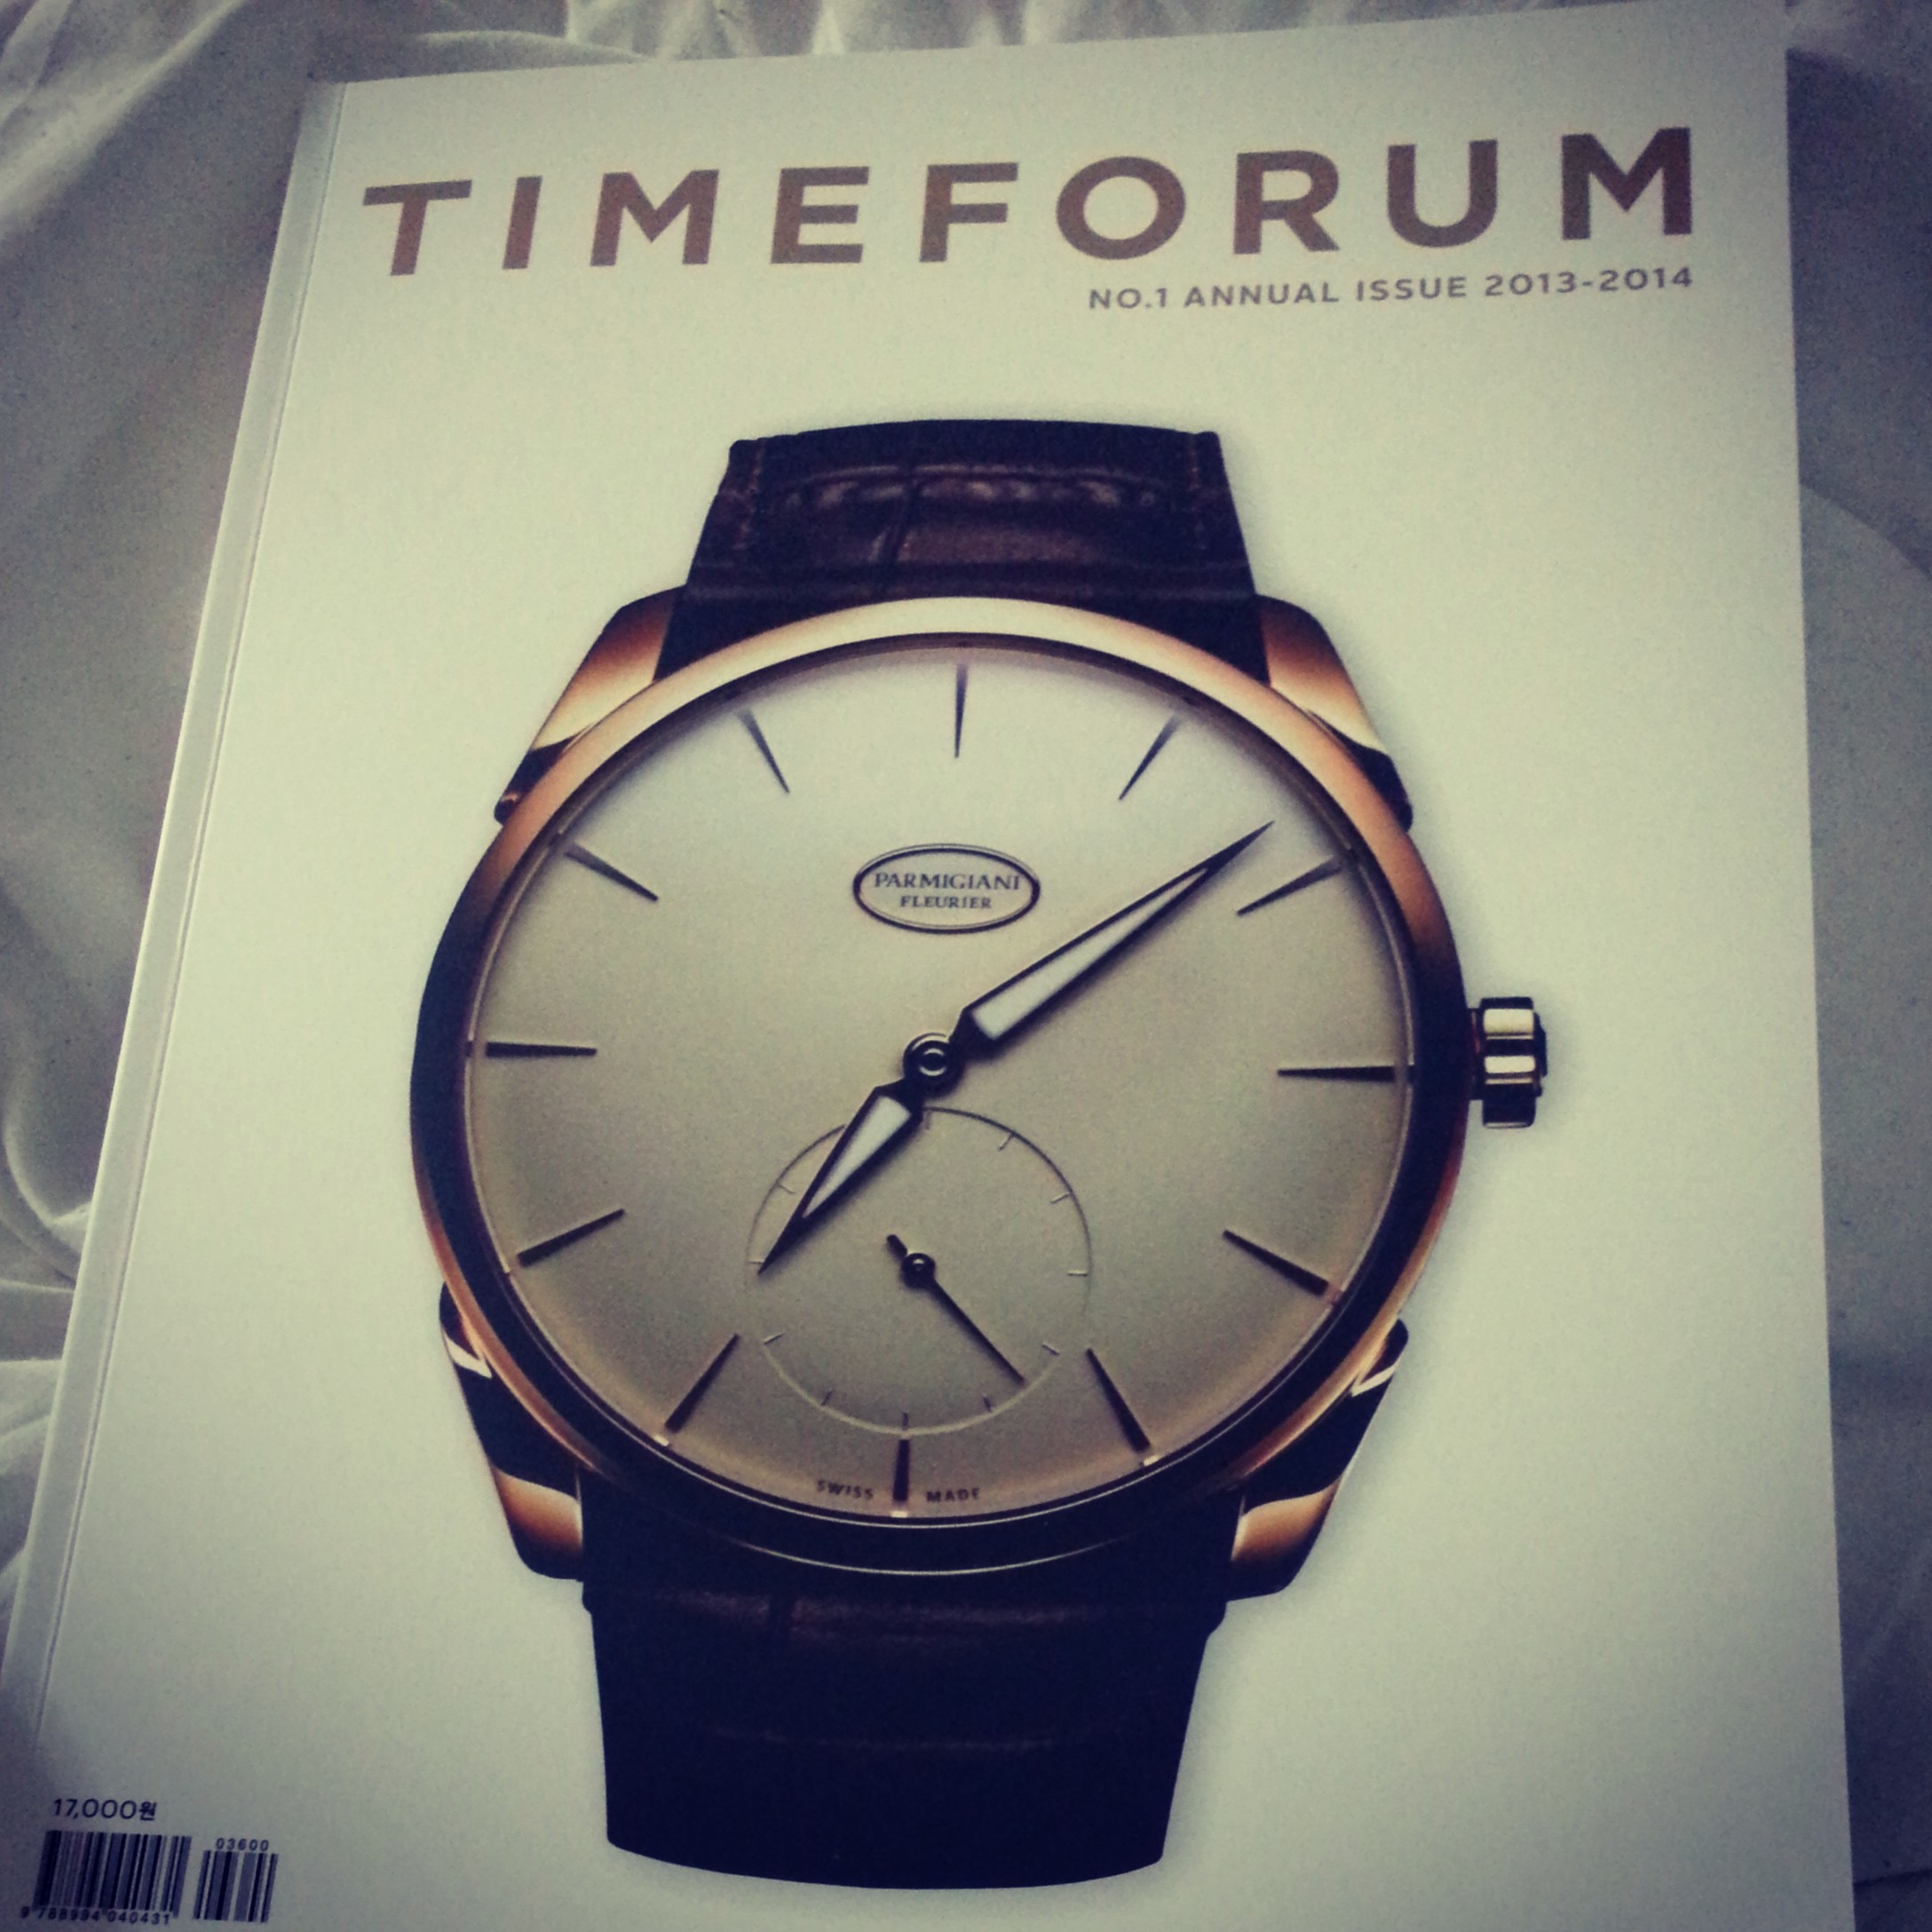 IMG_20131212_163006.jpg : Time Forum Annual Issue 인증 샷!